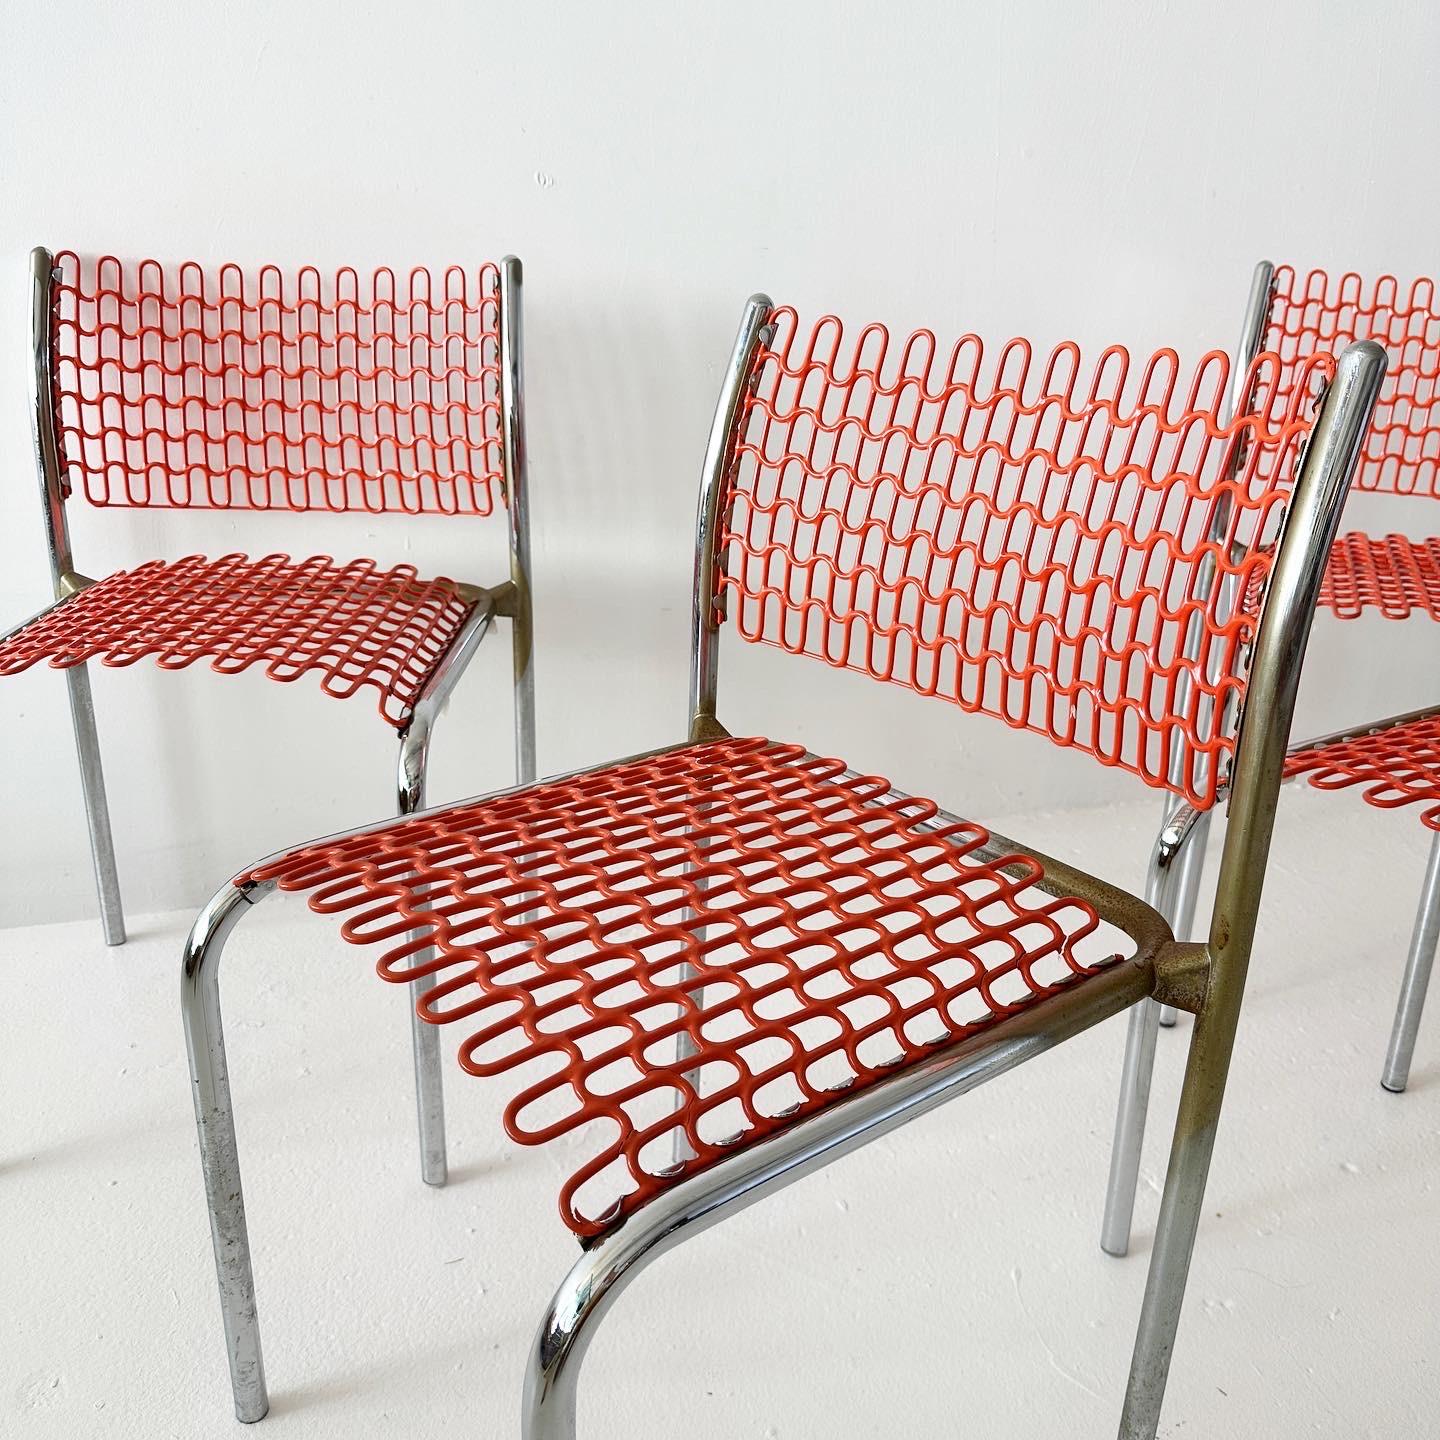 American Orange Sof Tech Chairs by David Rowland for Thonet (set of 4) For Sale